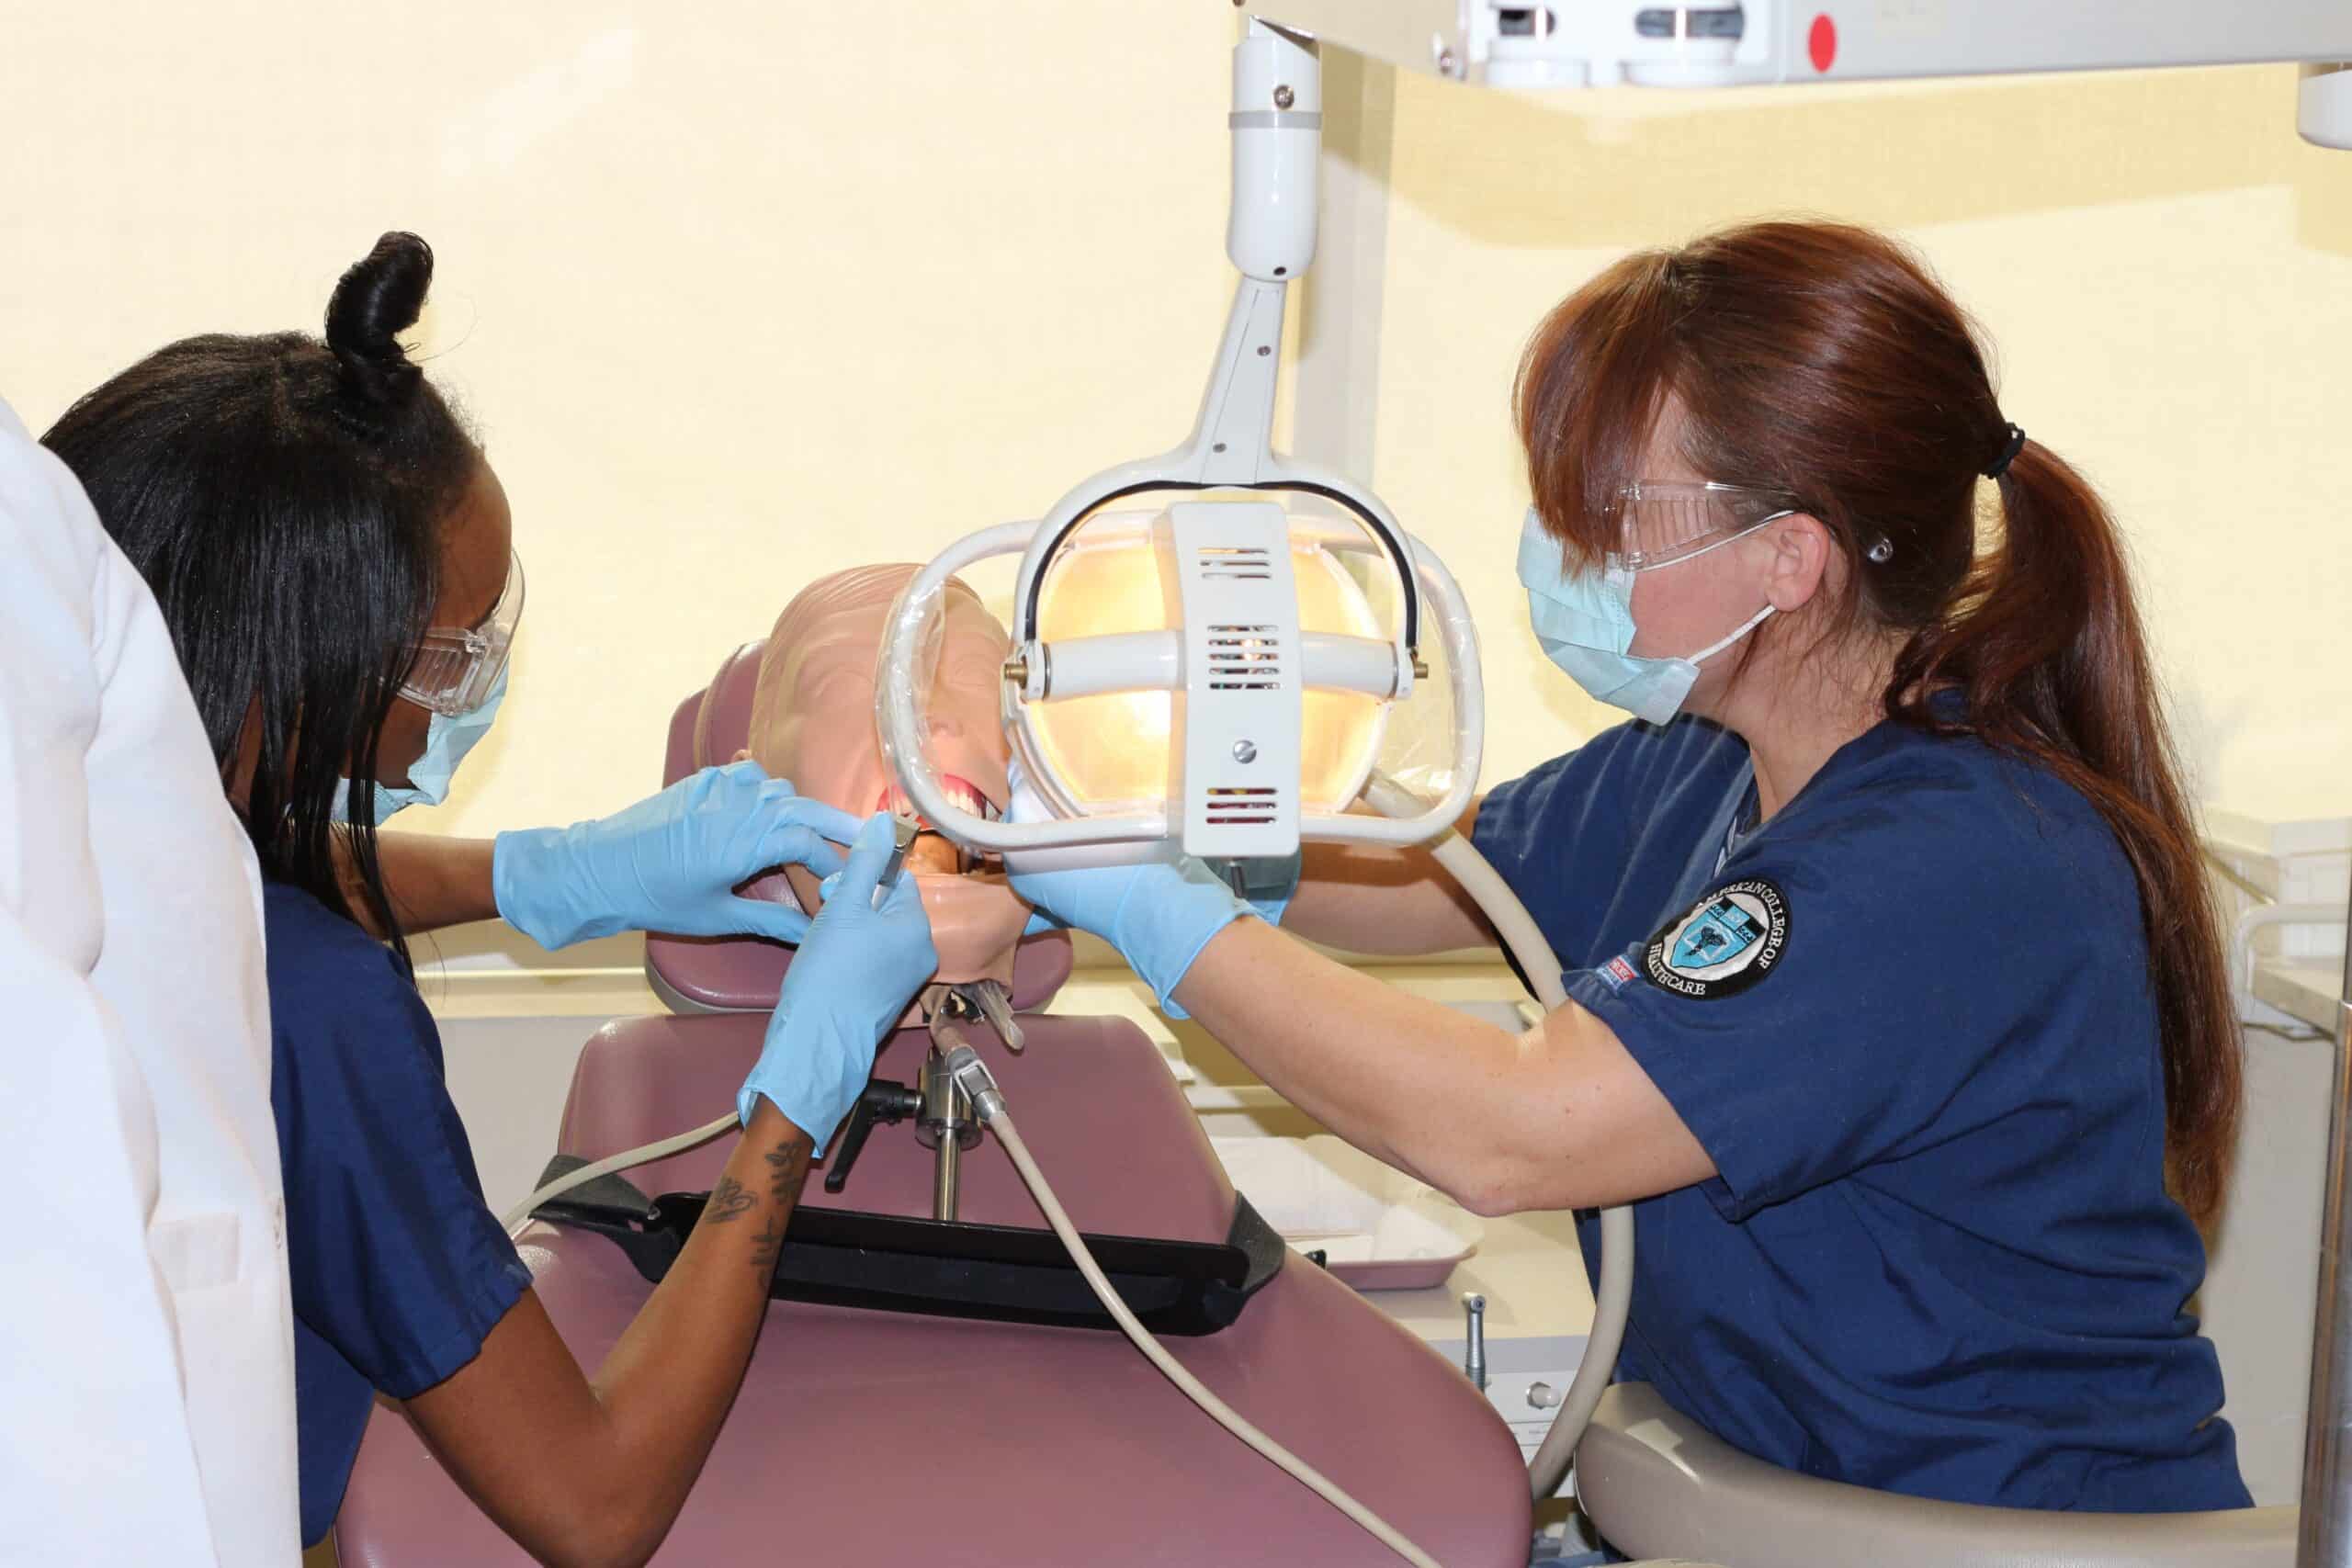 10 things to succeed in Dental Assistant program